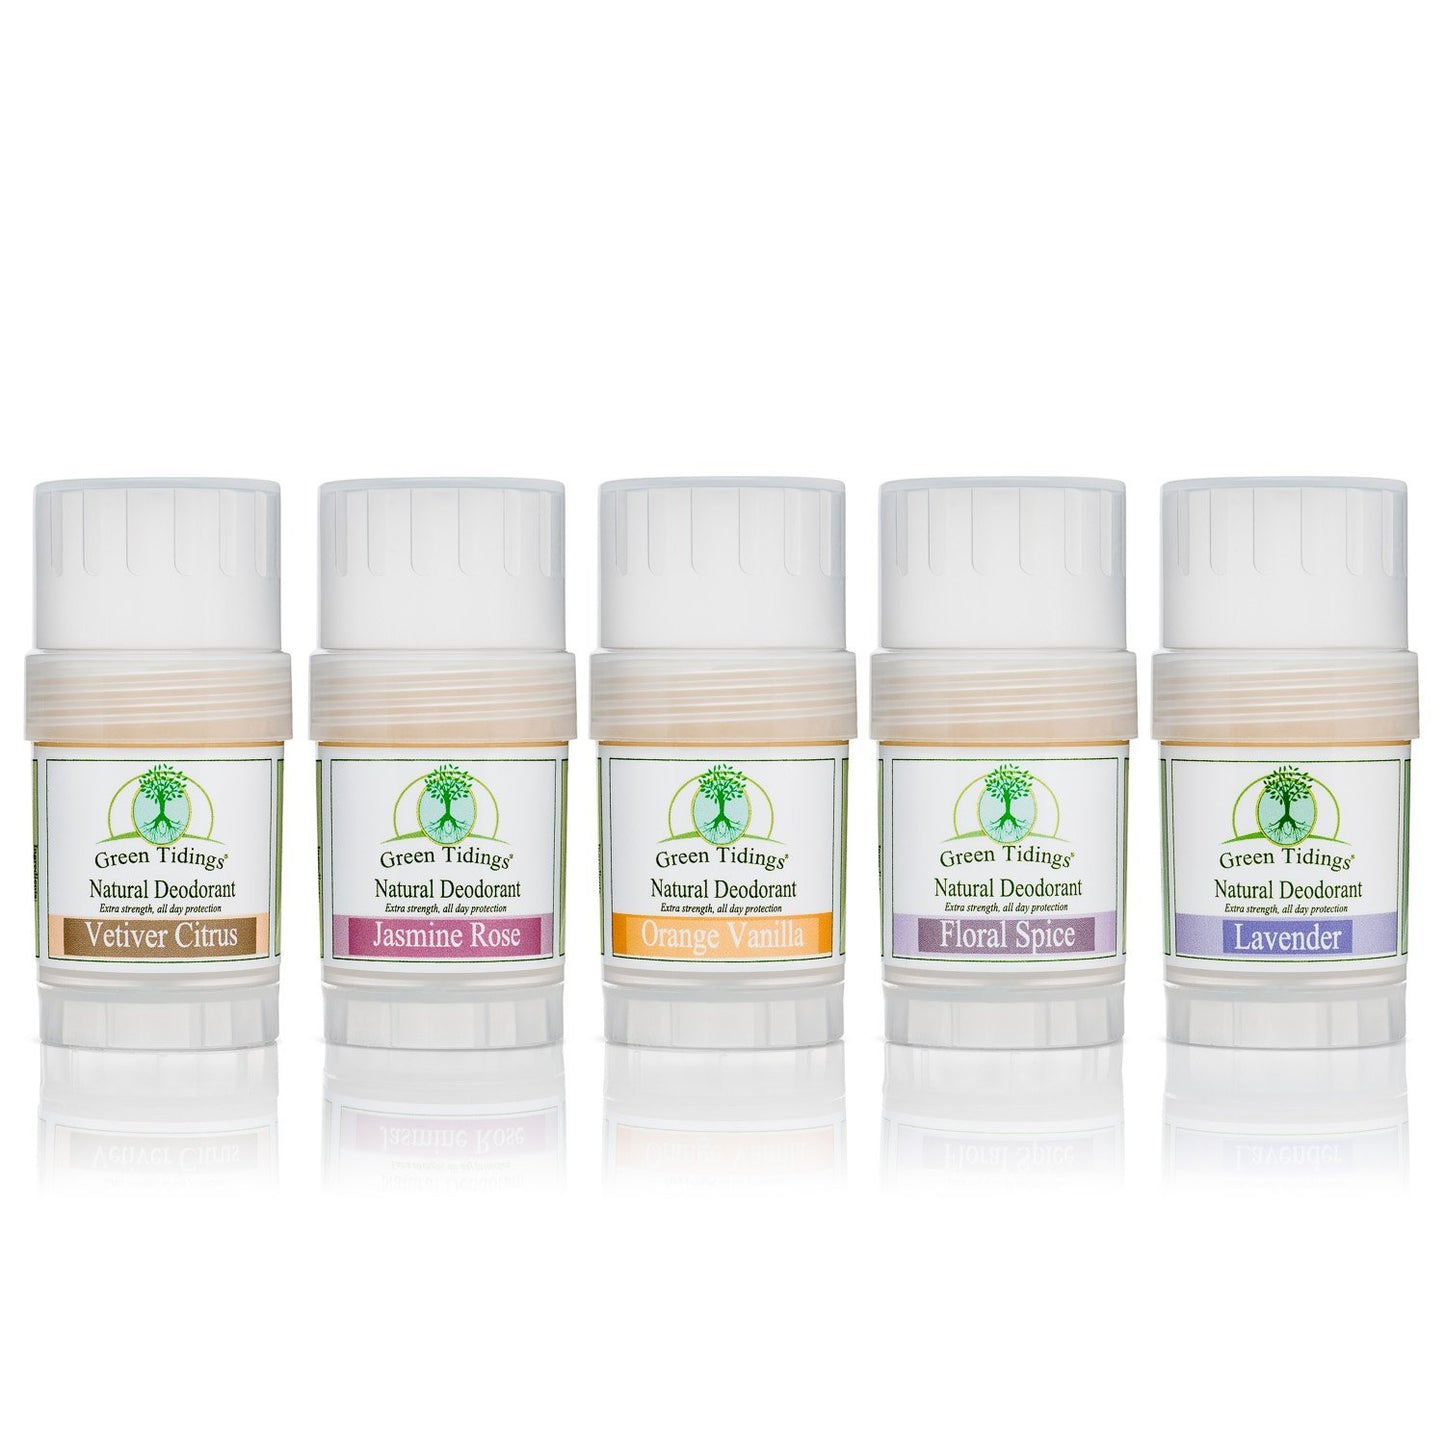 Green Tidings Natural Deodorant- 5 Pack Scent Sampler (1 ounce, tester/travel size) - Green Tidings